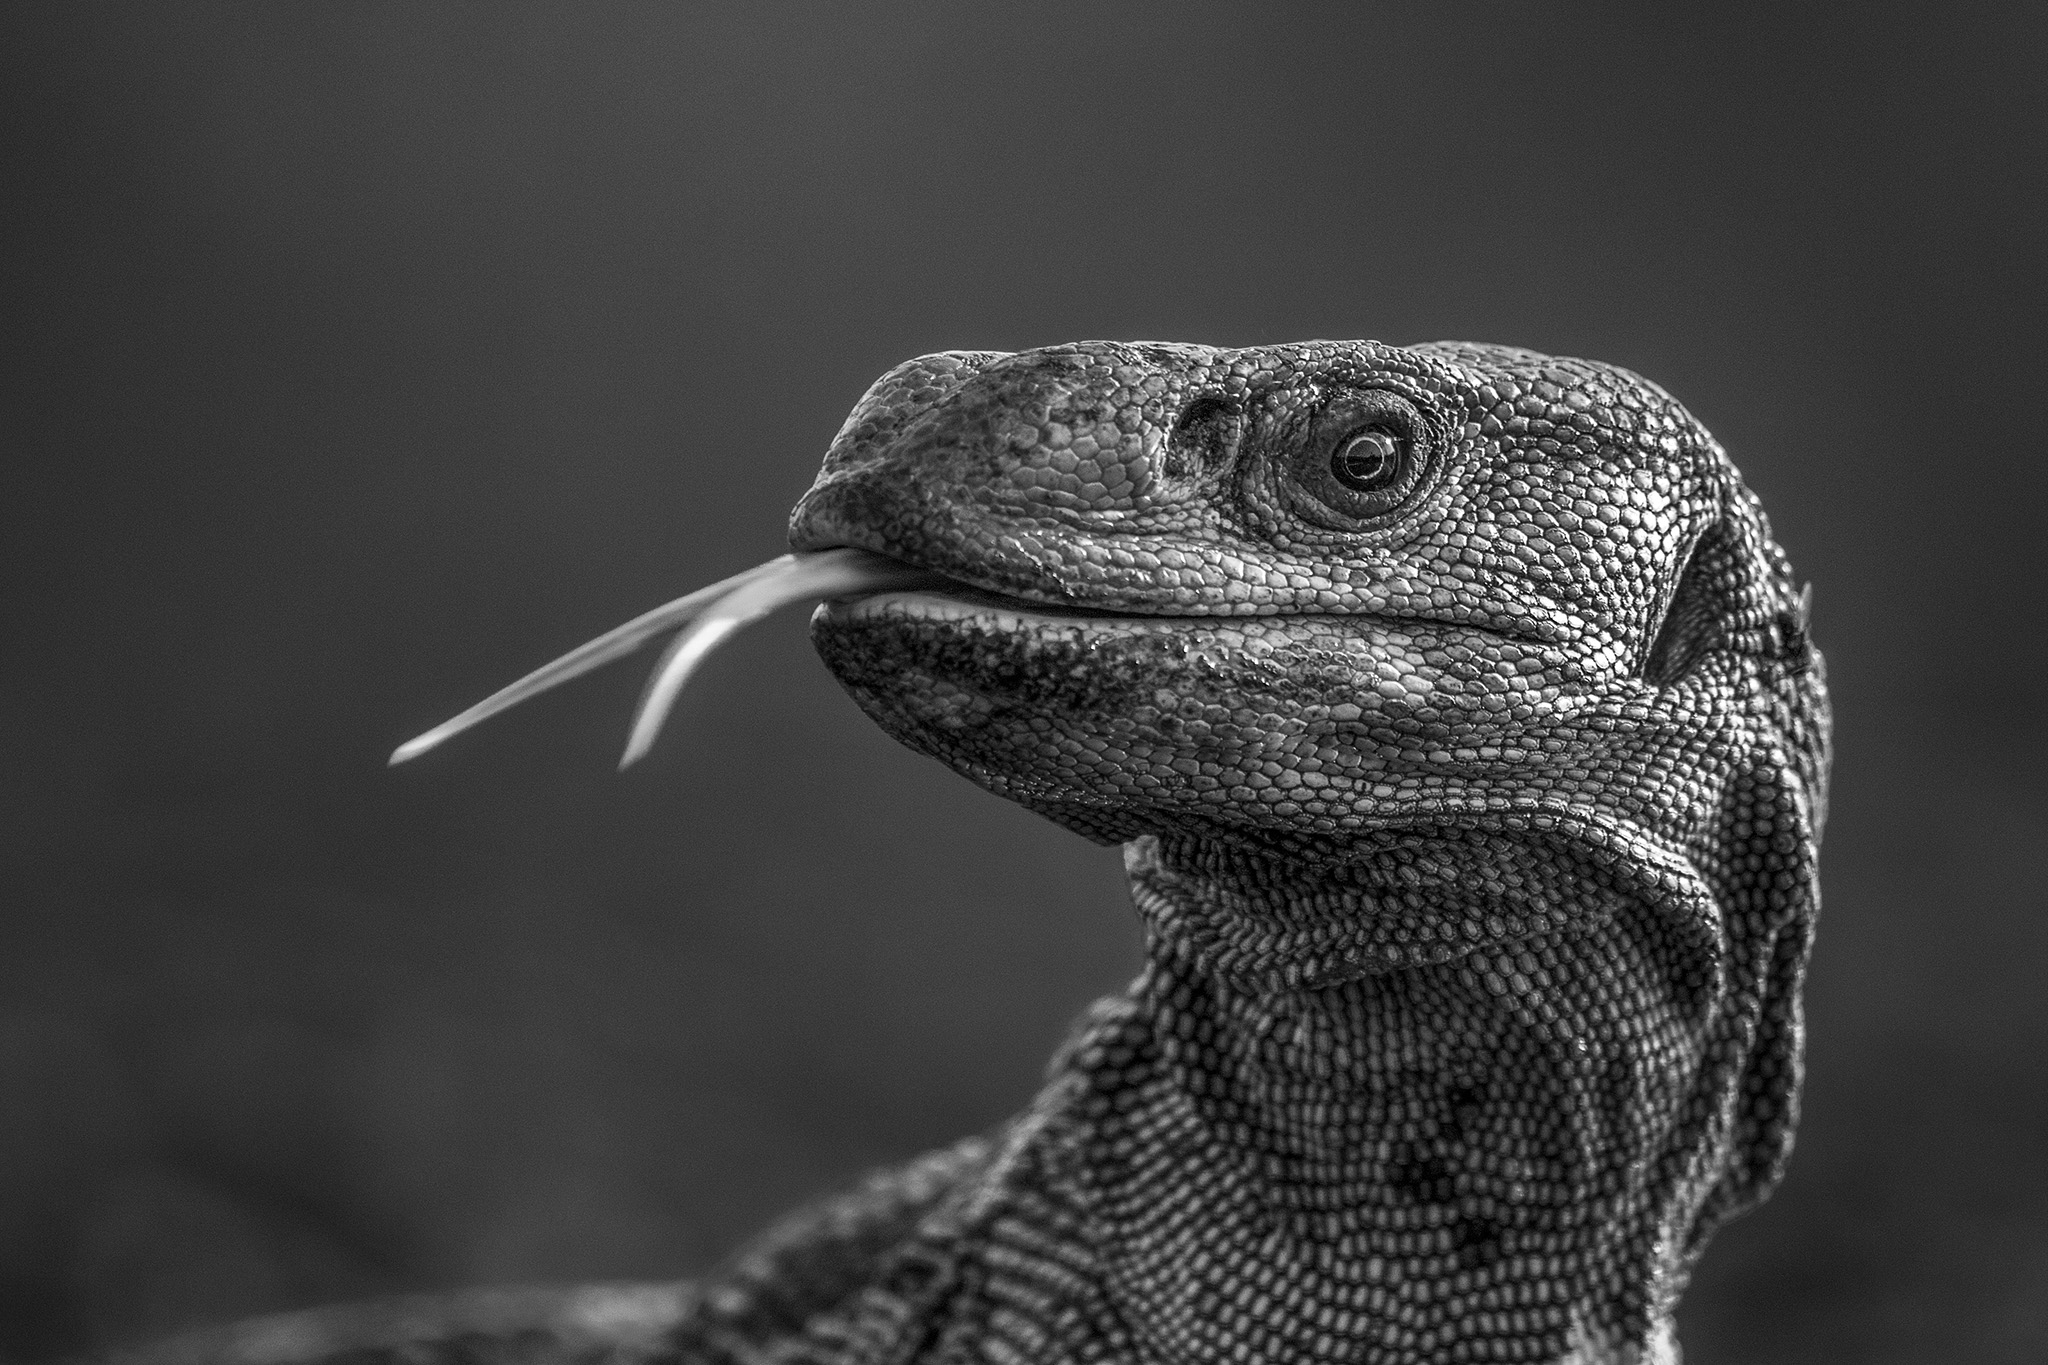 Profile of a monitor lizard's head with its tongue protruding